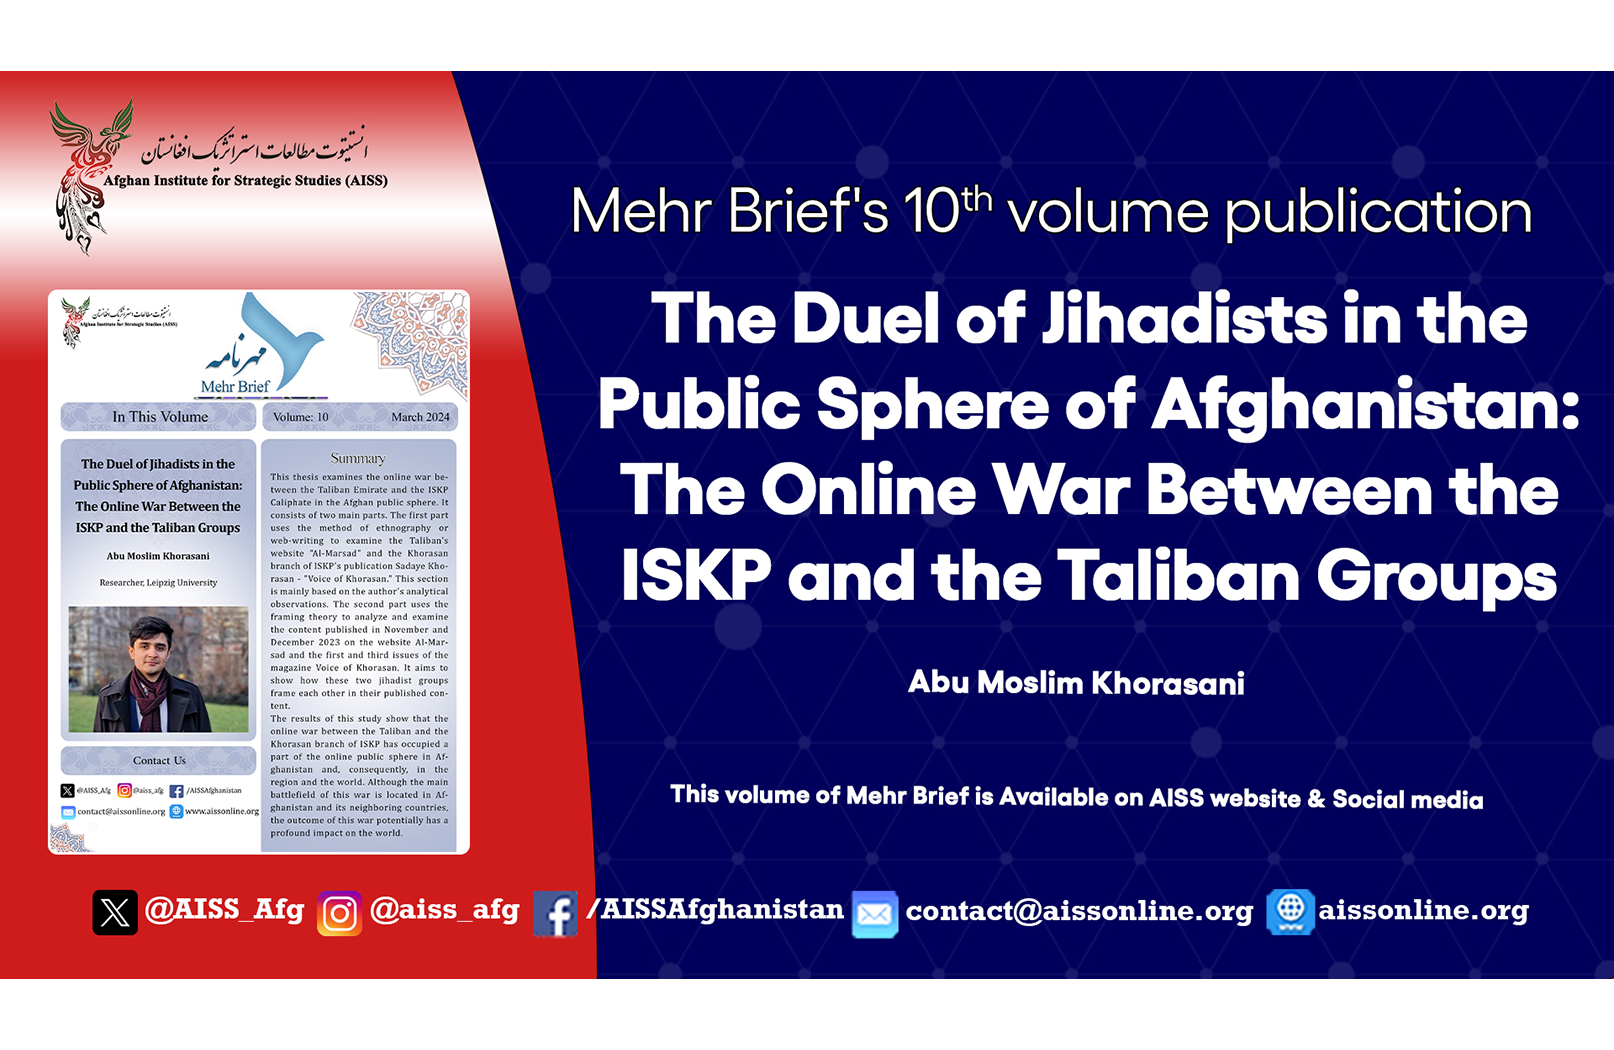 <p><strong><span style="font-size:11.0pt"><span style="font-family:&quot;Calibri&quot;,sans-serif">The Duel of Jihadists in the Public Sphere of Afghanistan: The Online War Between the ISKP and the Taliban Groups</span></span></strong></p>